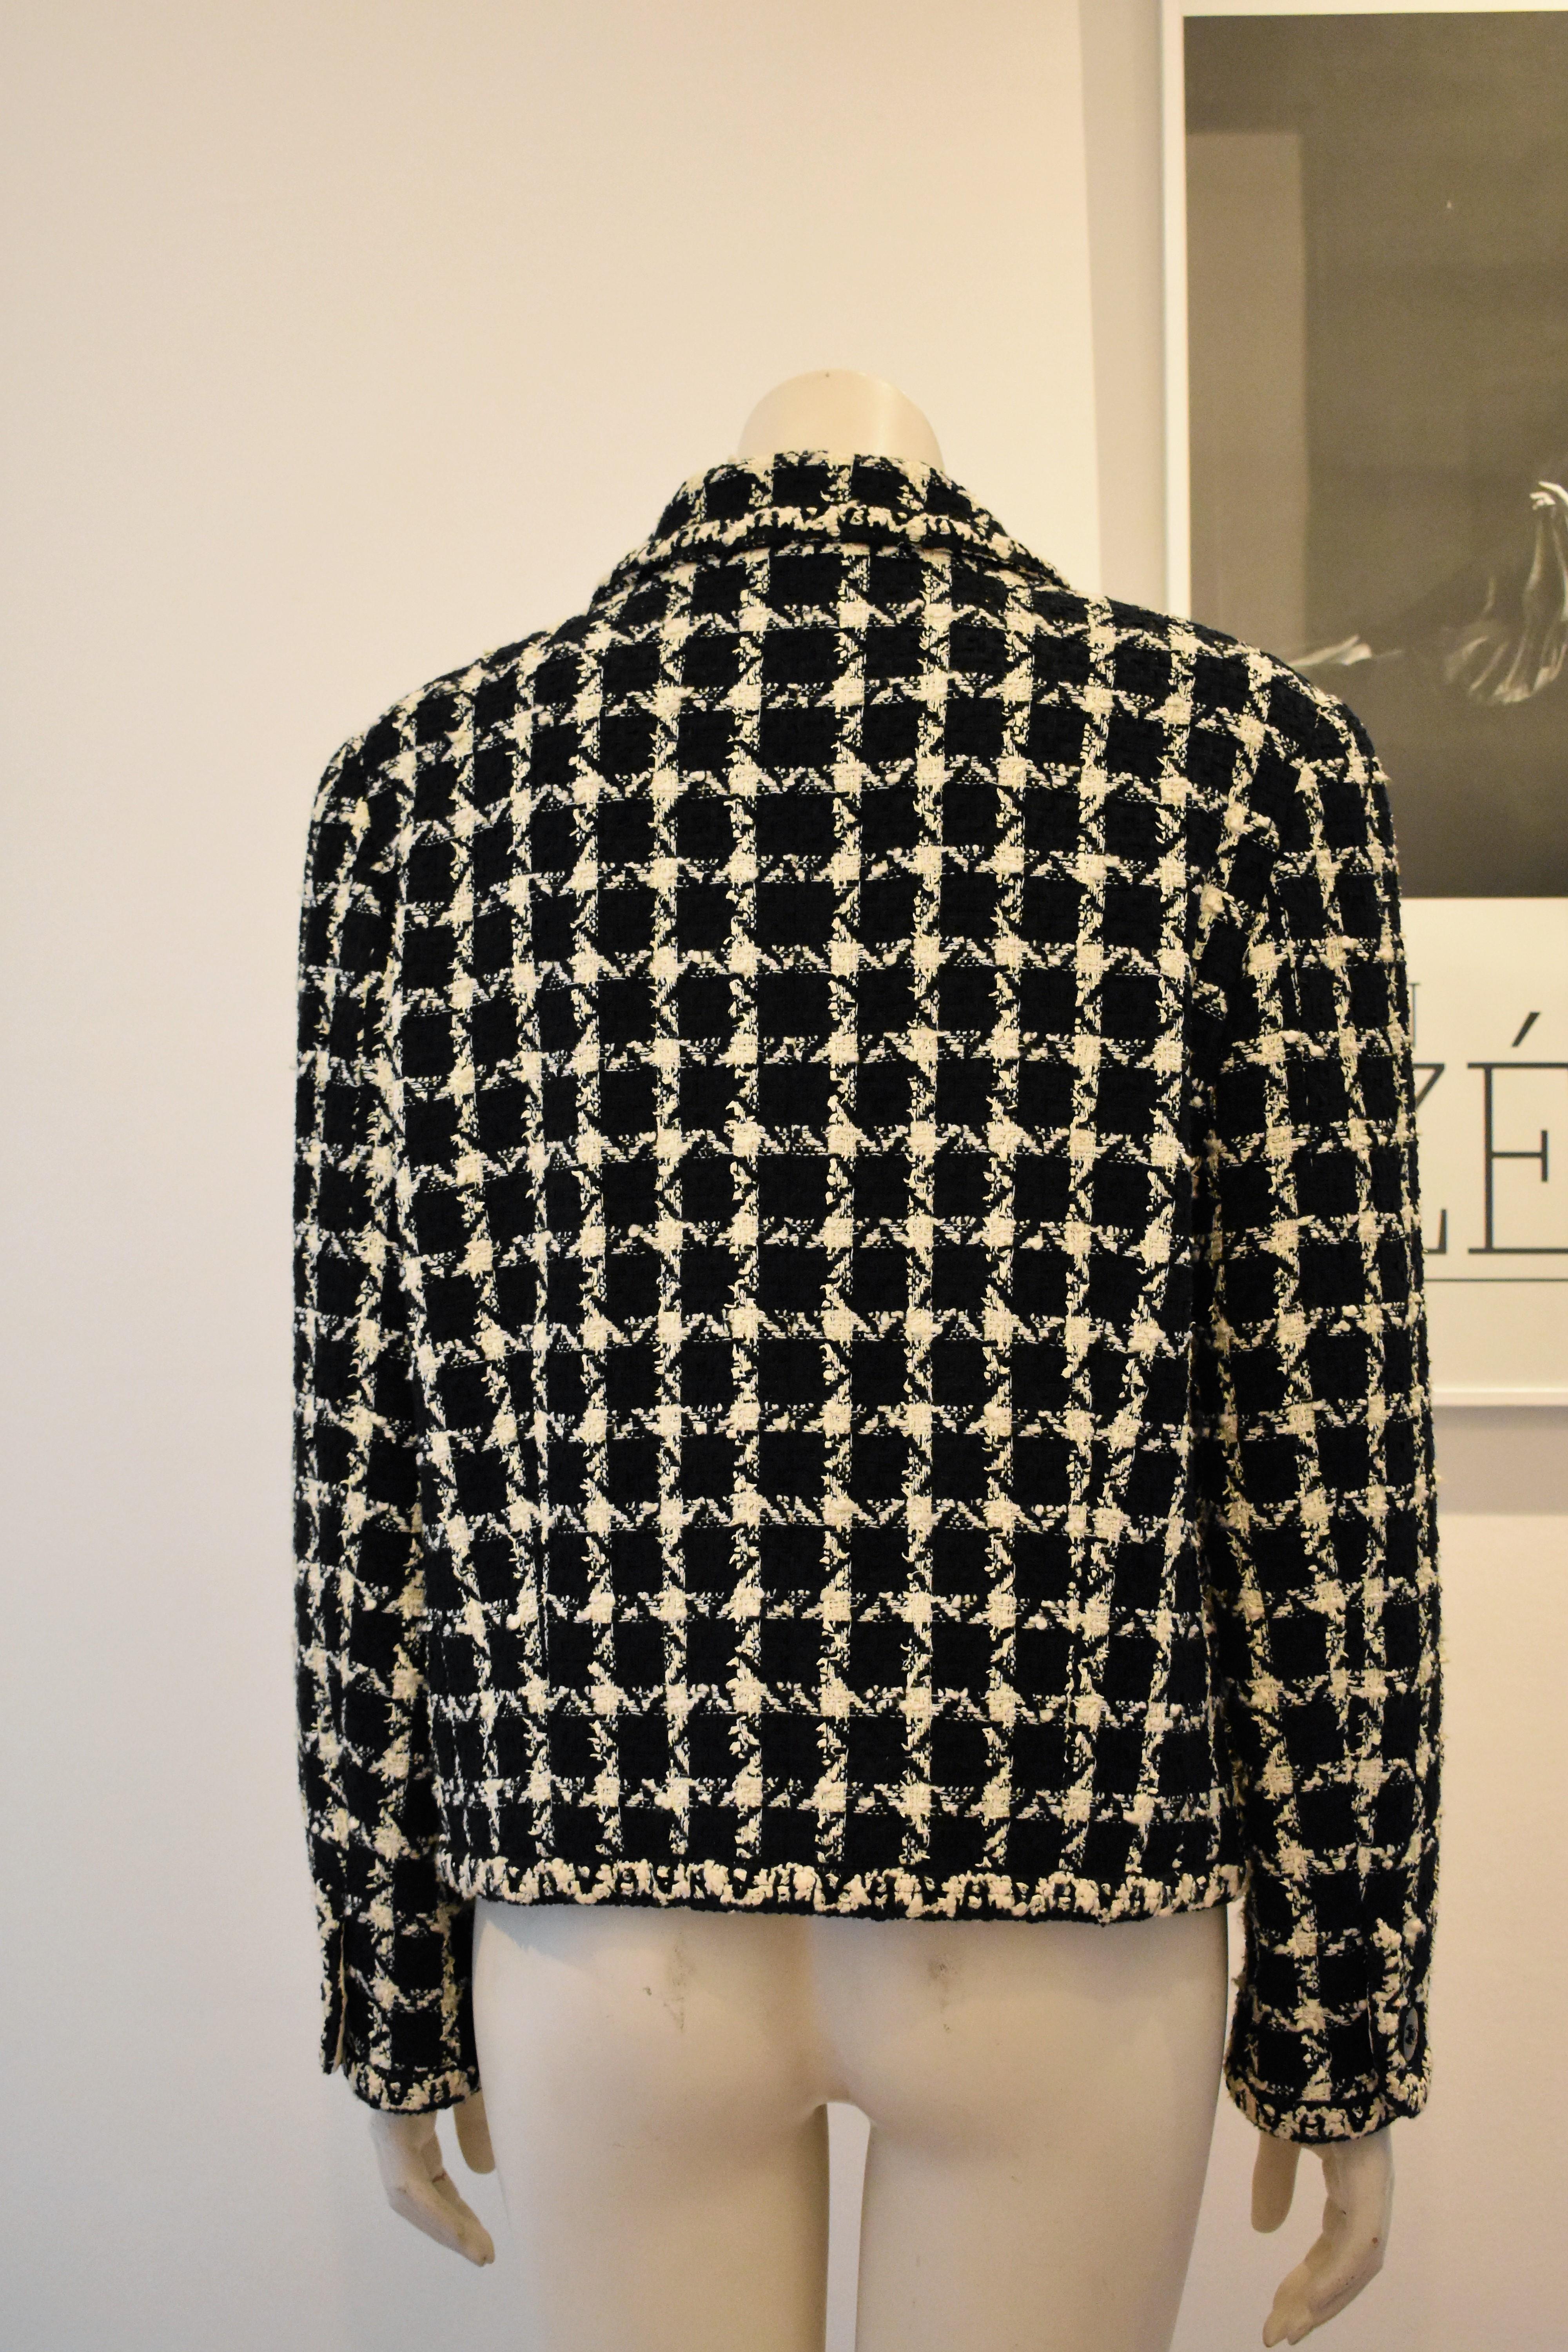 Chanel Classic Houndstooth Boucle Jacket in Black and White, 1998C 1